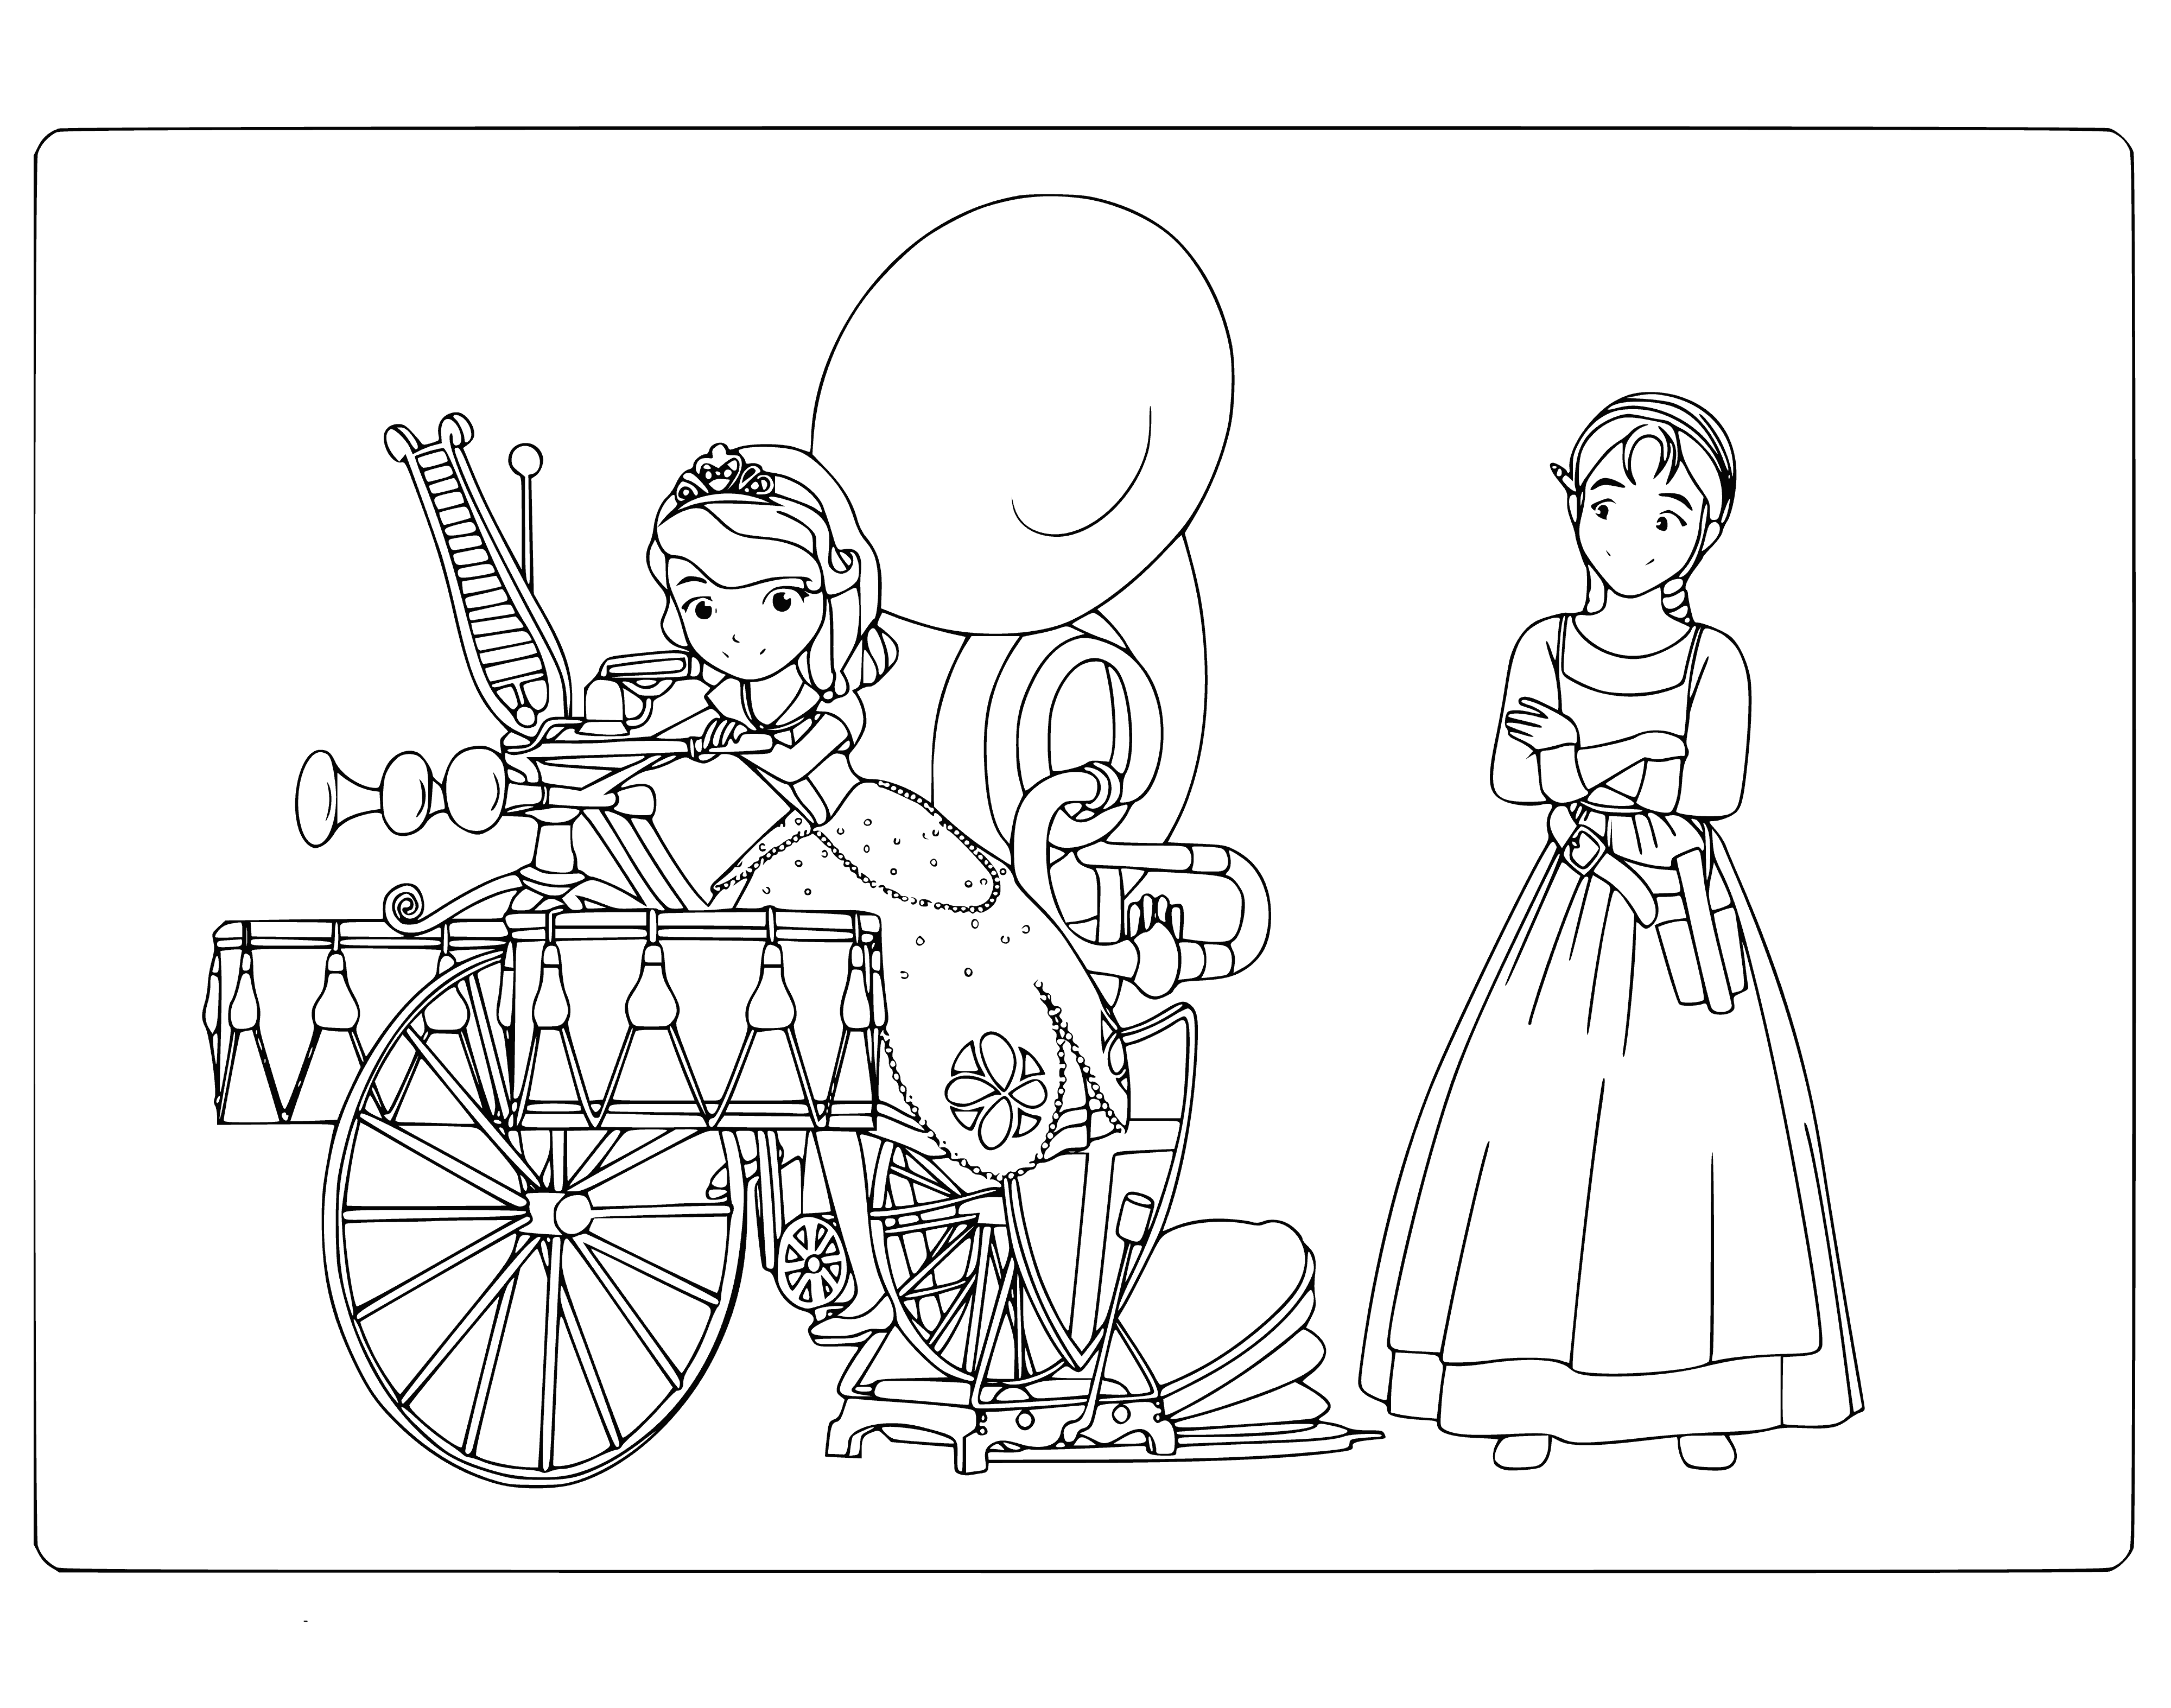 coloring page: Two friends exploring the mystery of a large machine, with one getting excited by the explanation.